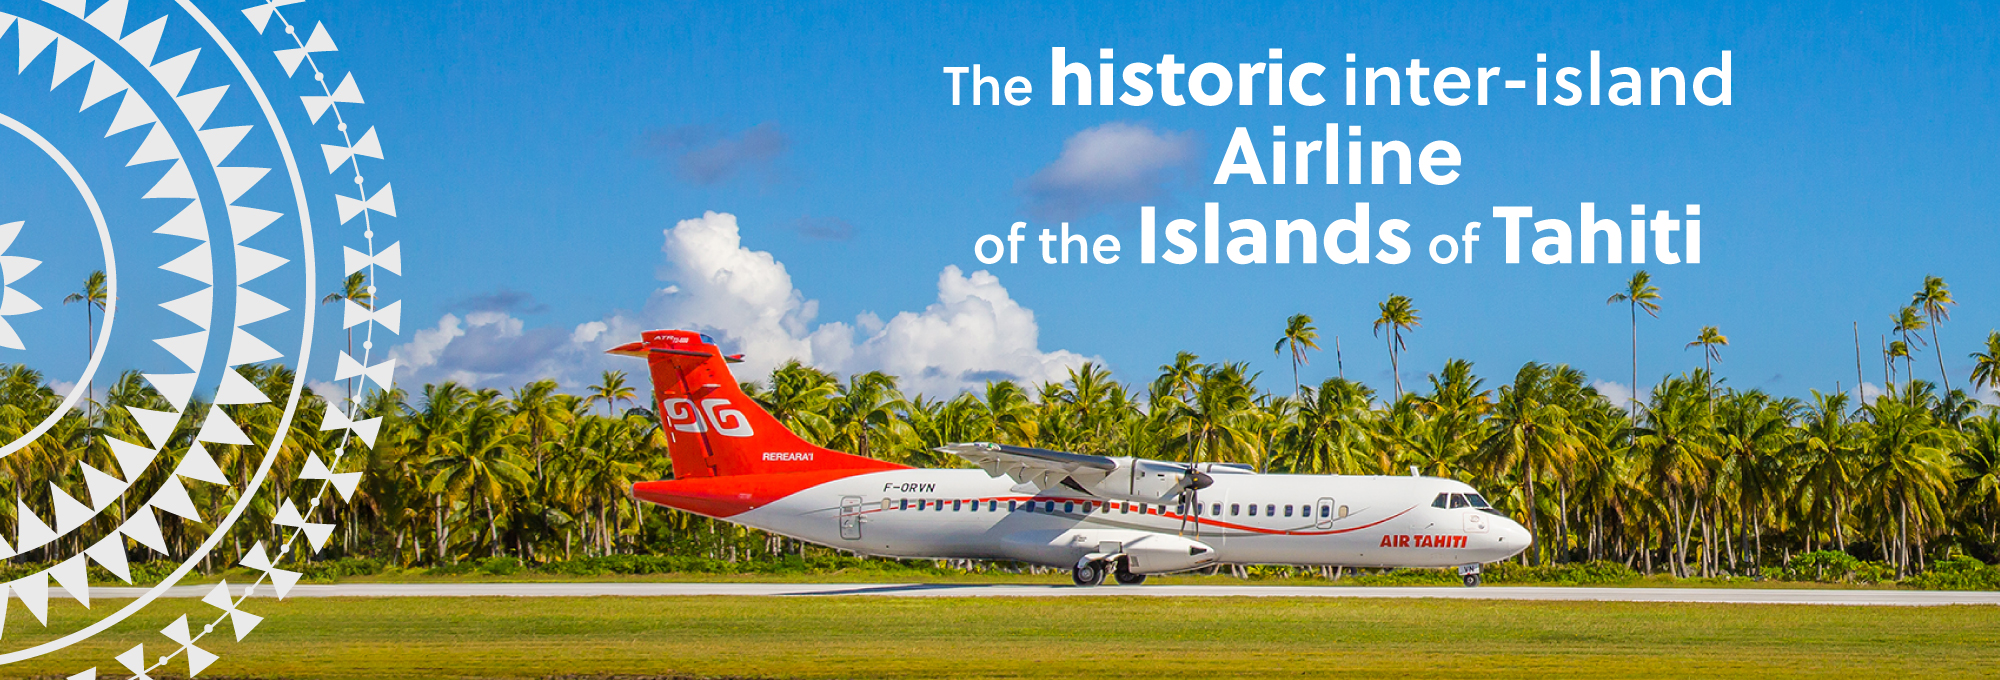 The historic inter-island airline